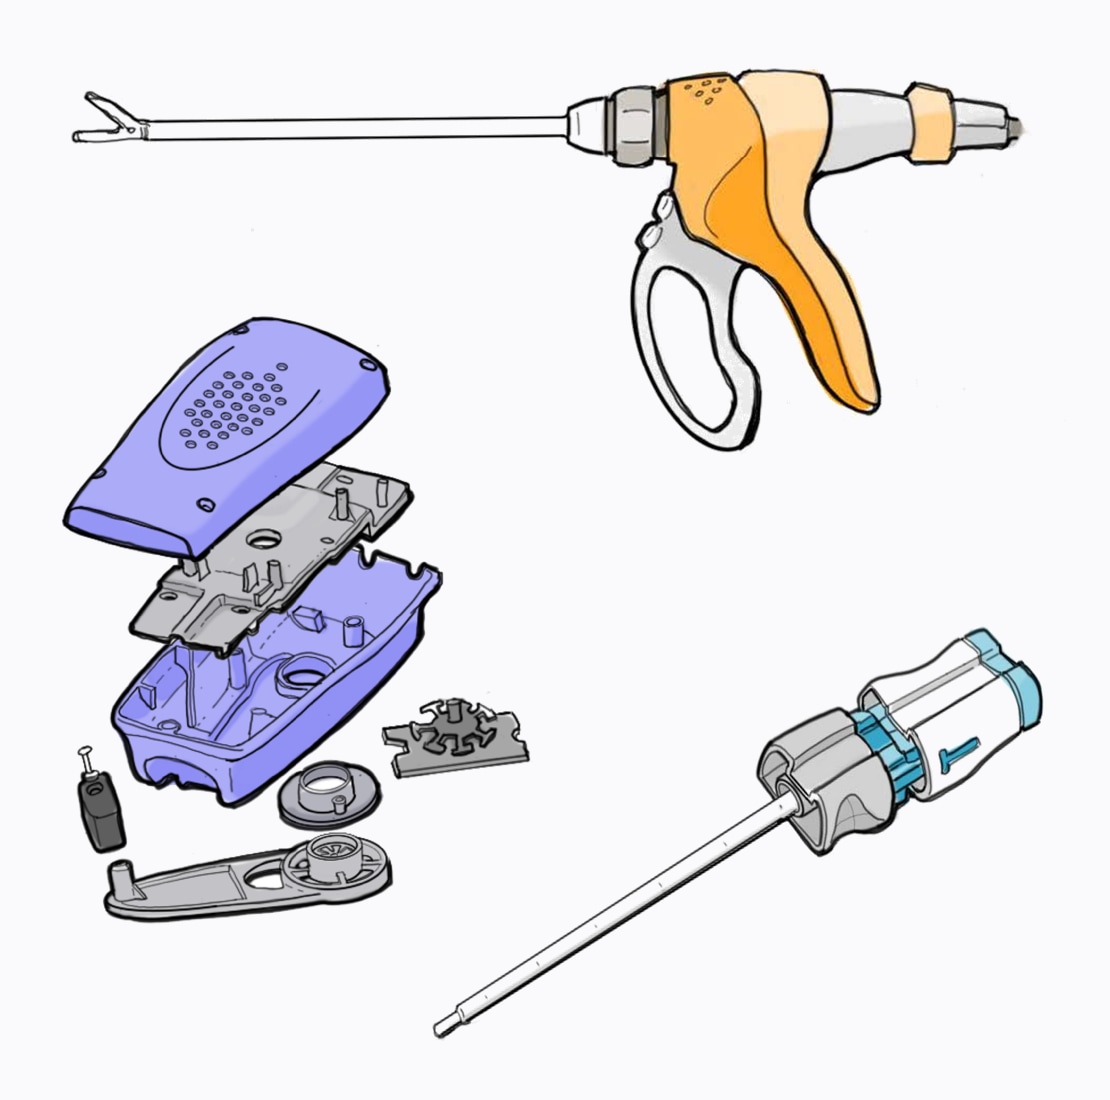 sketch of medical and surgical devices and components